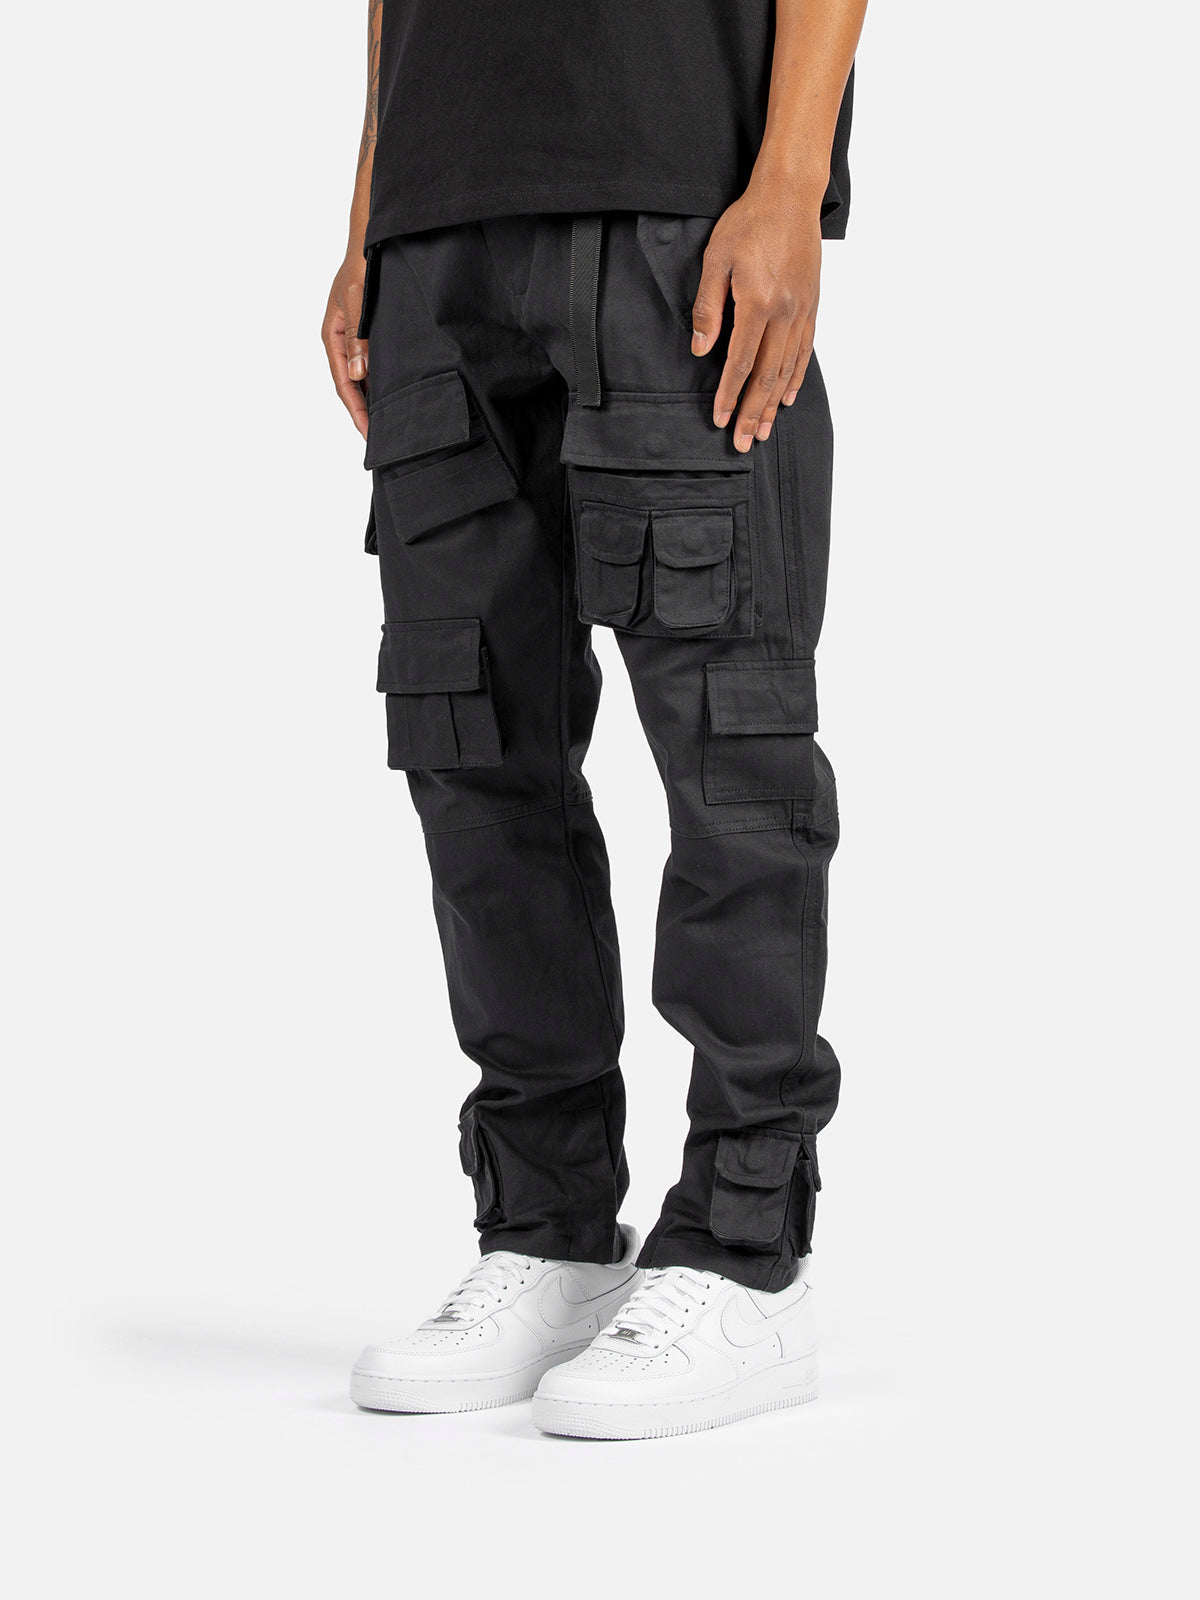 NEV Star Zip Up Cargo Pants | Online shopping clothes, Cargo pants, Street  style outfit